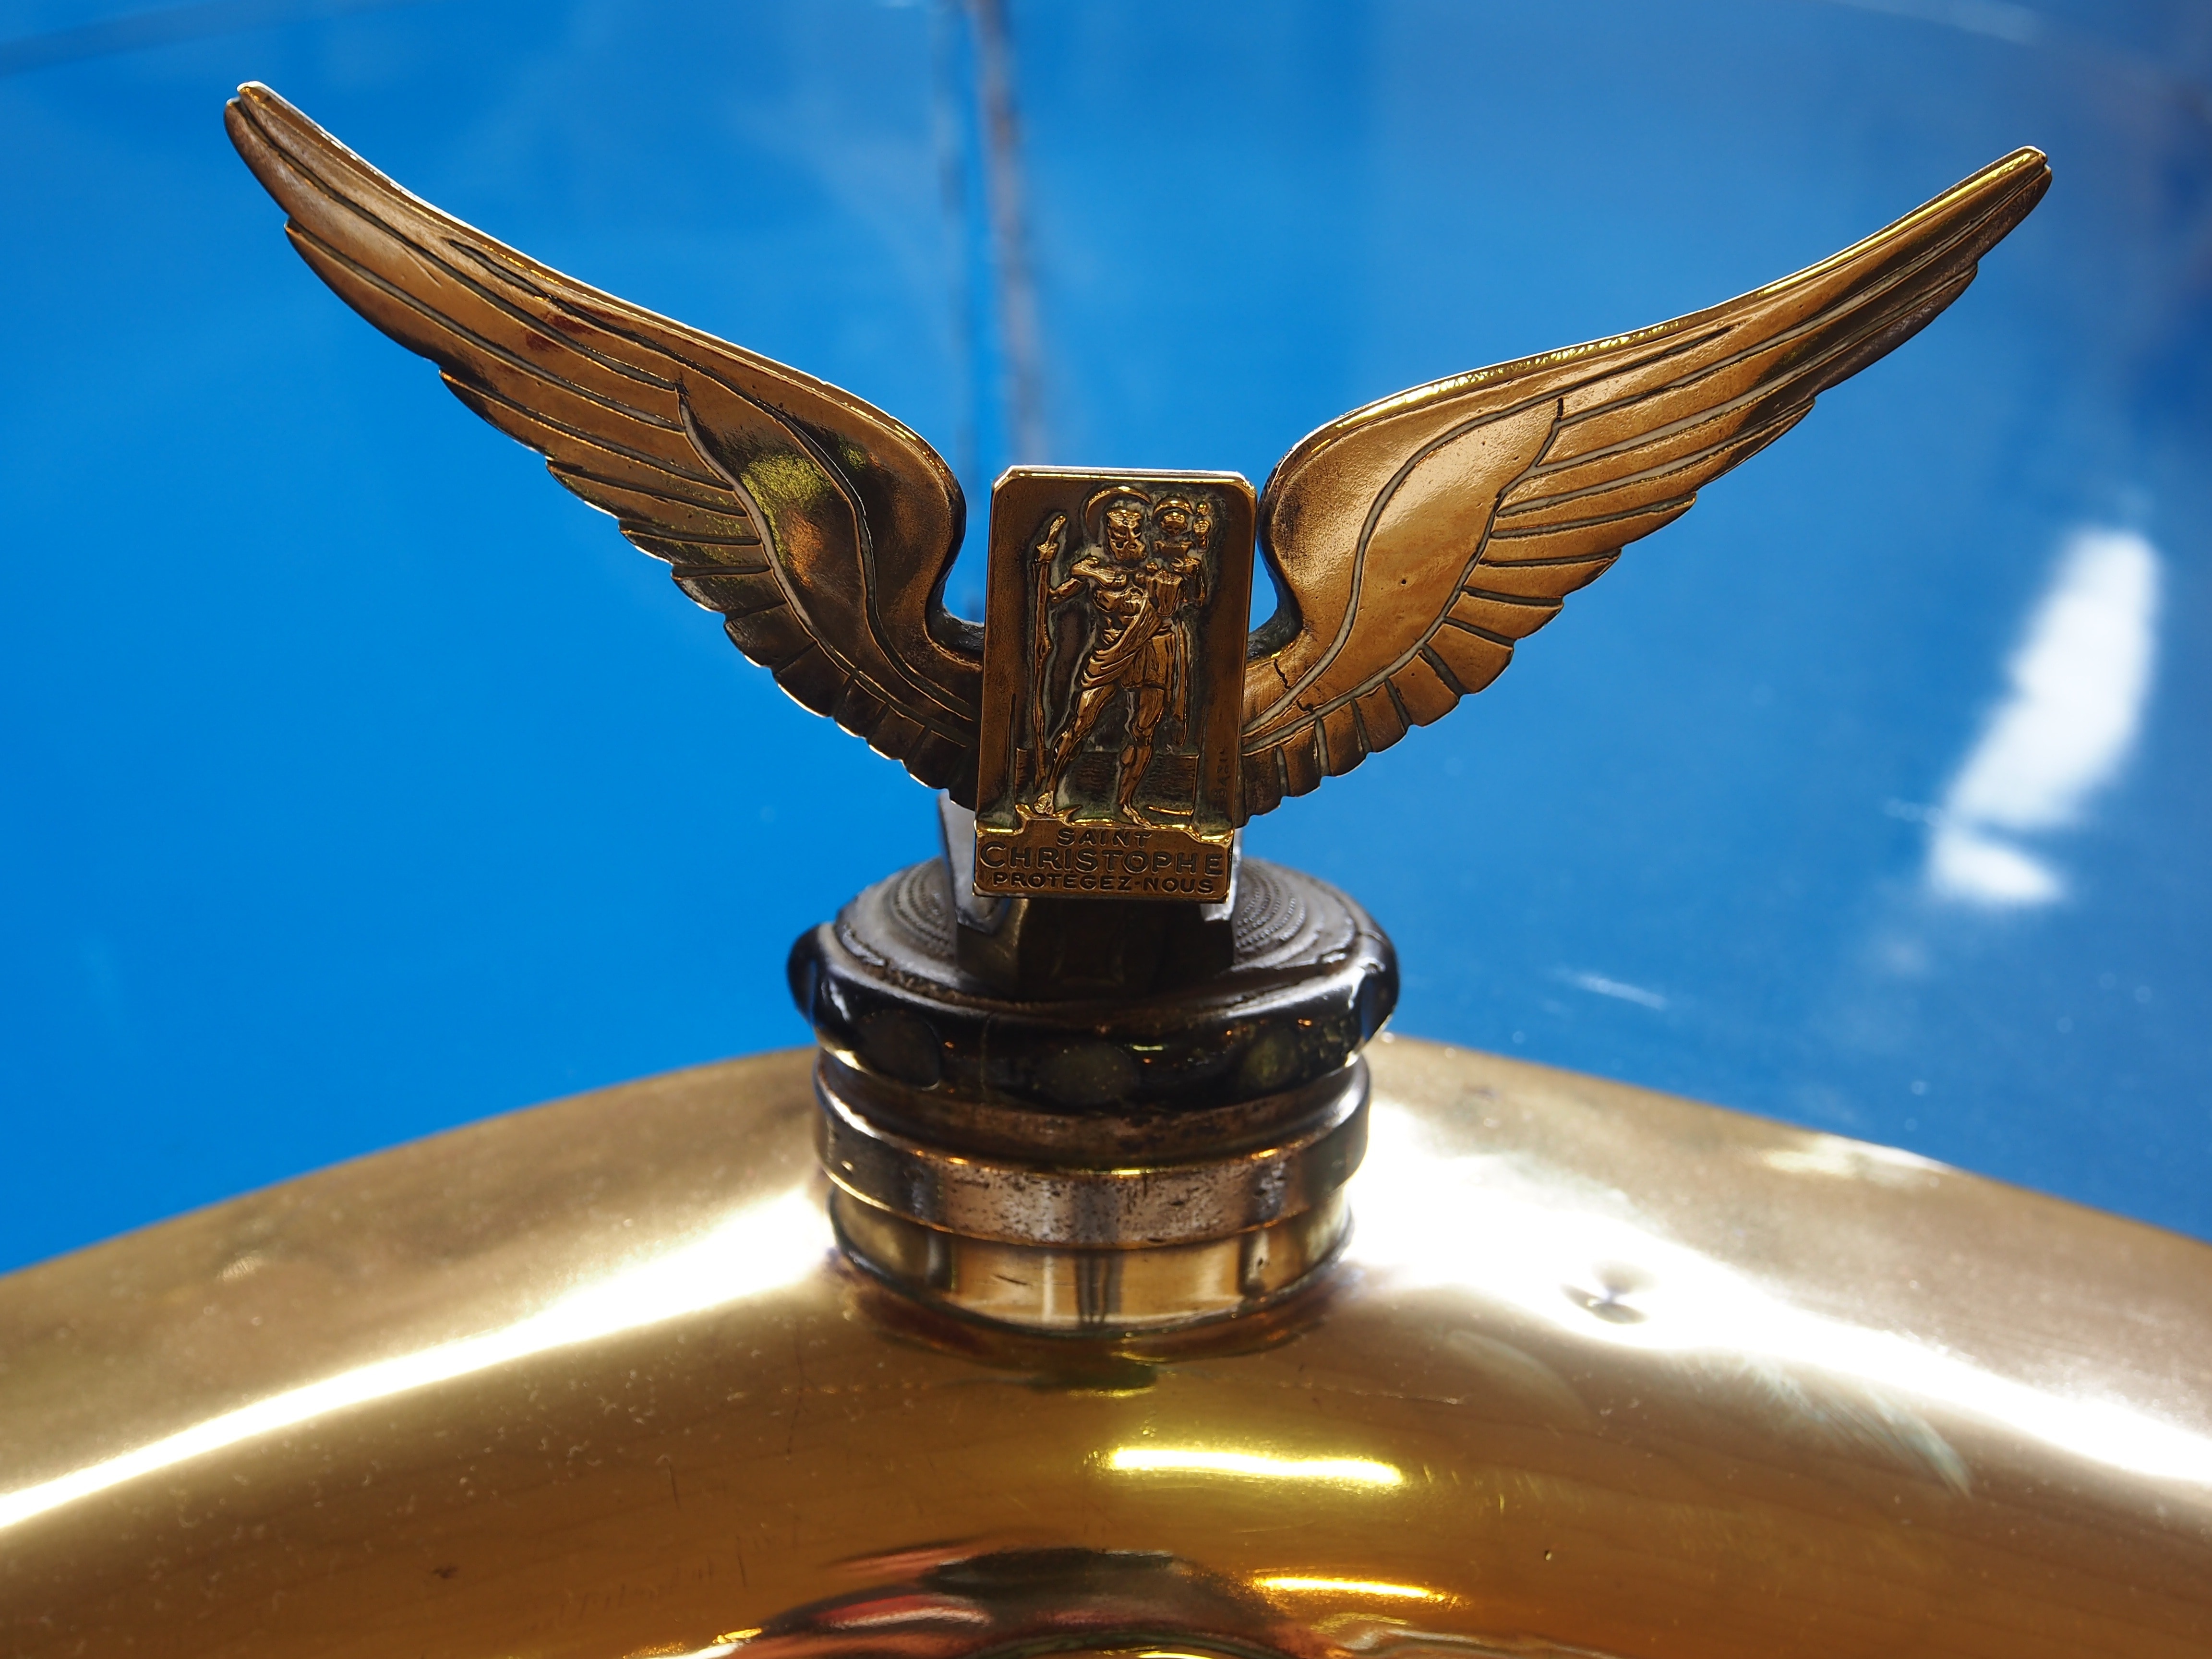 brass winged ornament